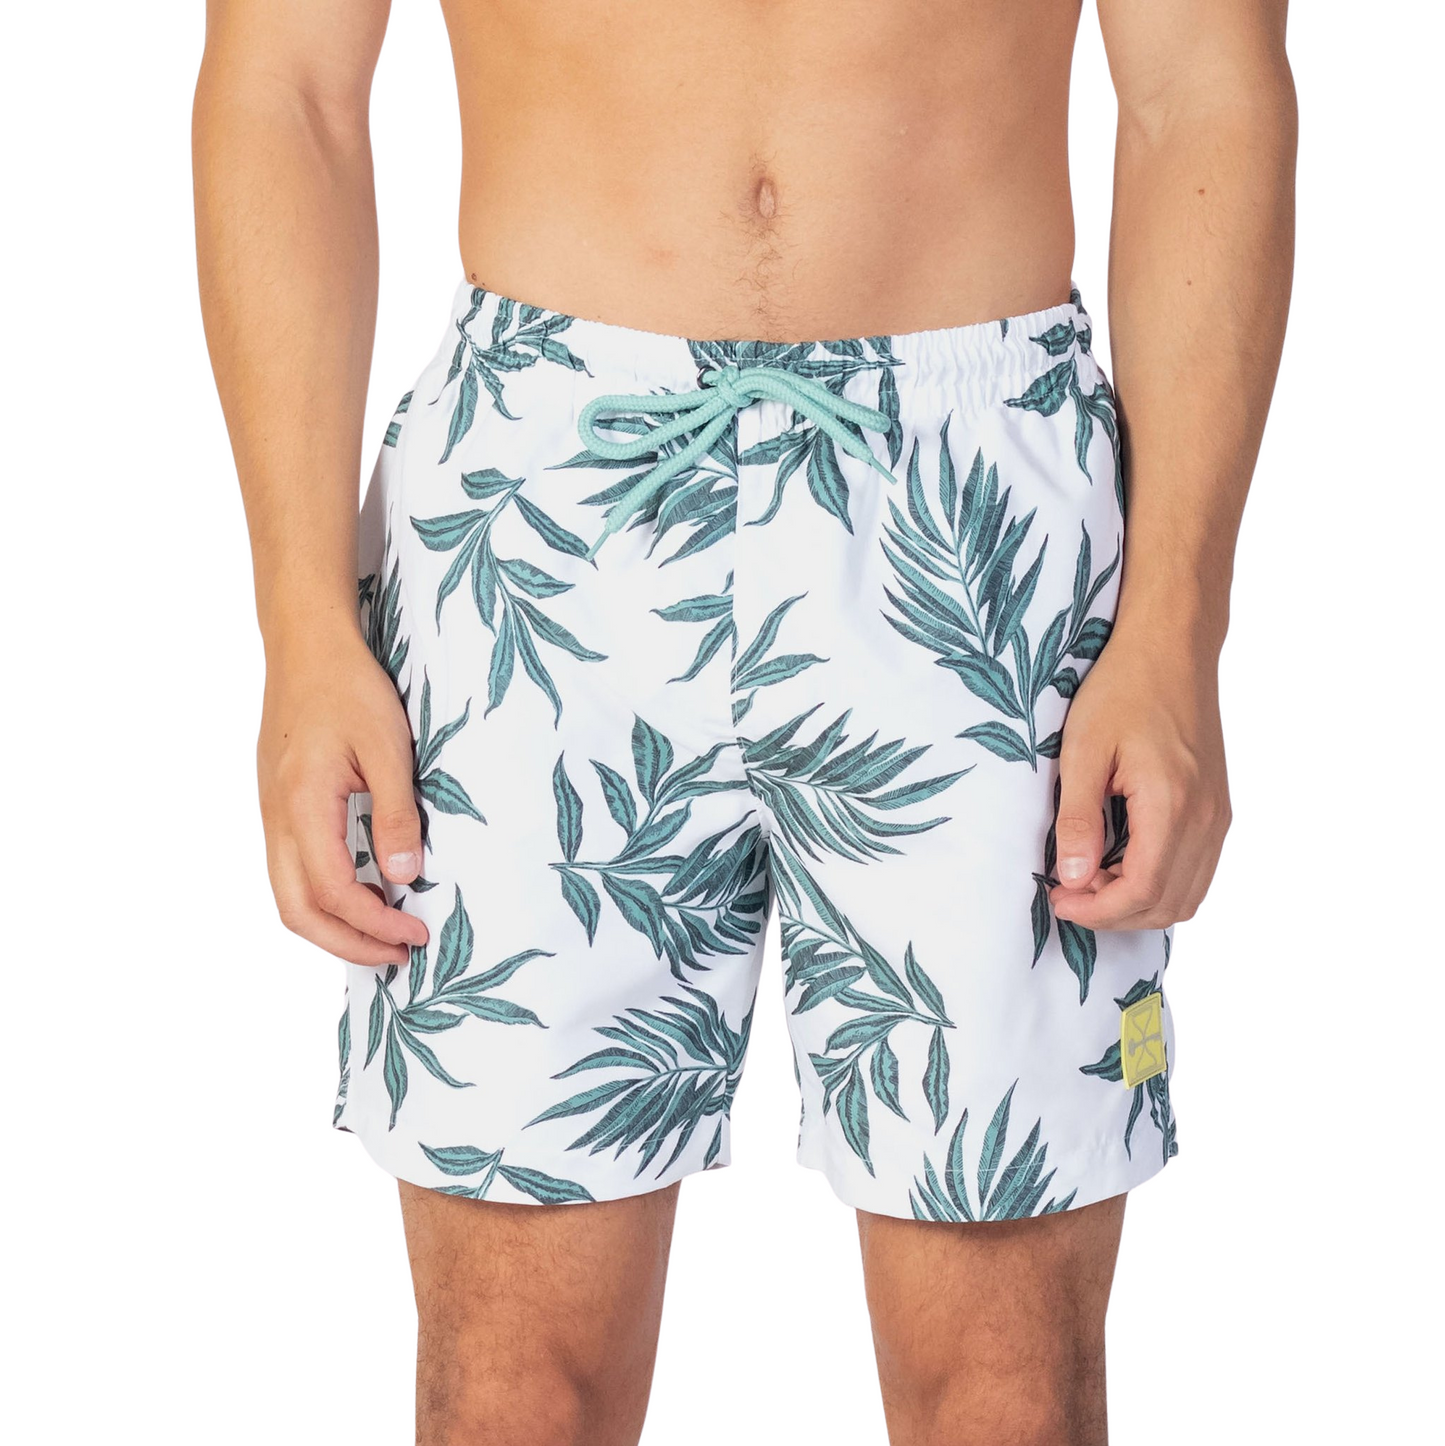 Teal/Floral Swim Shorts - Hourglass (Yellow Badge)